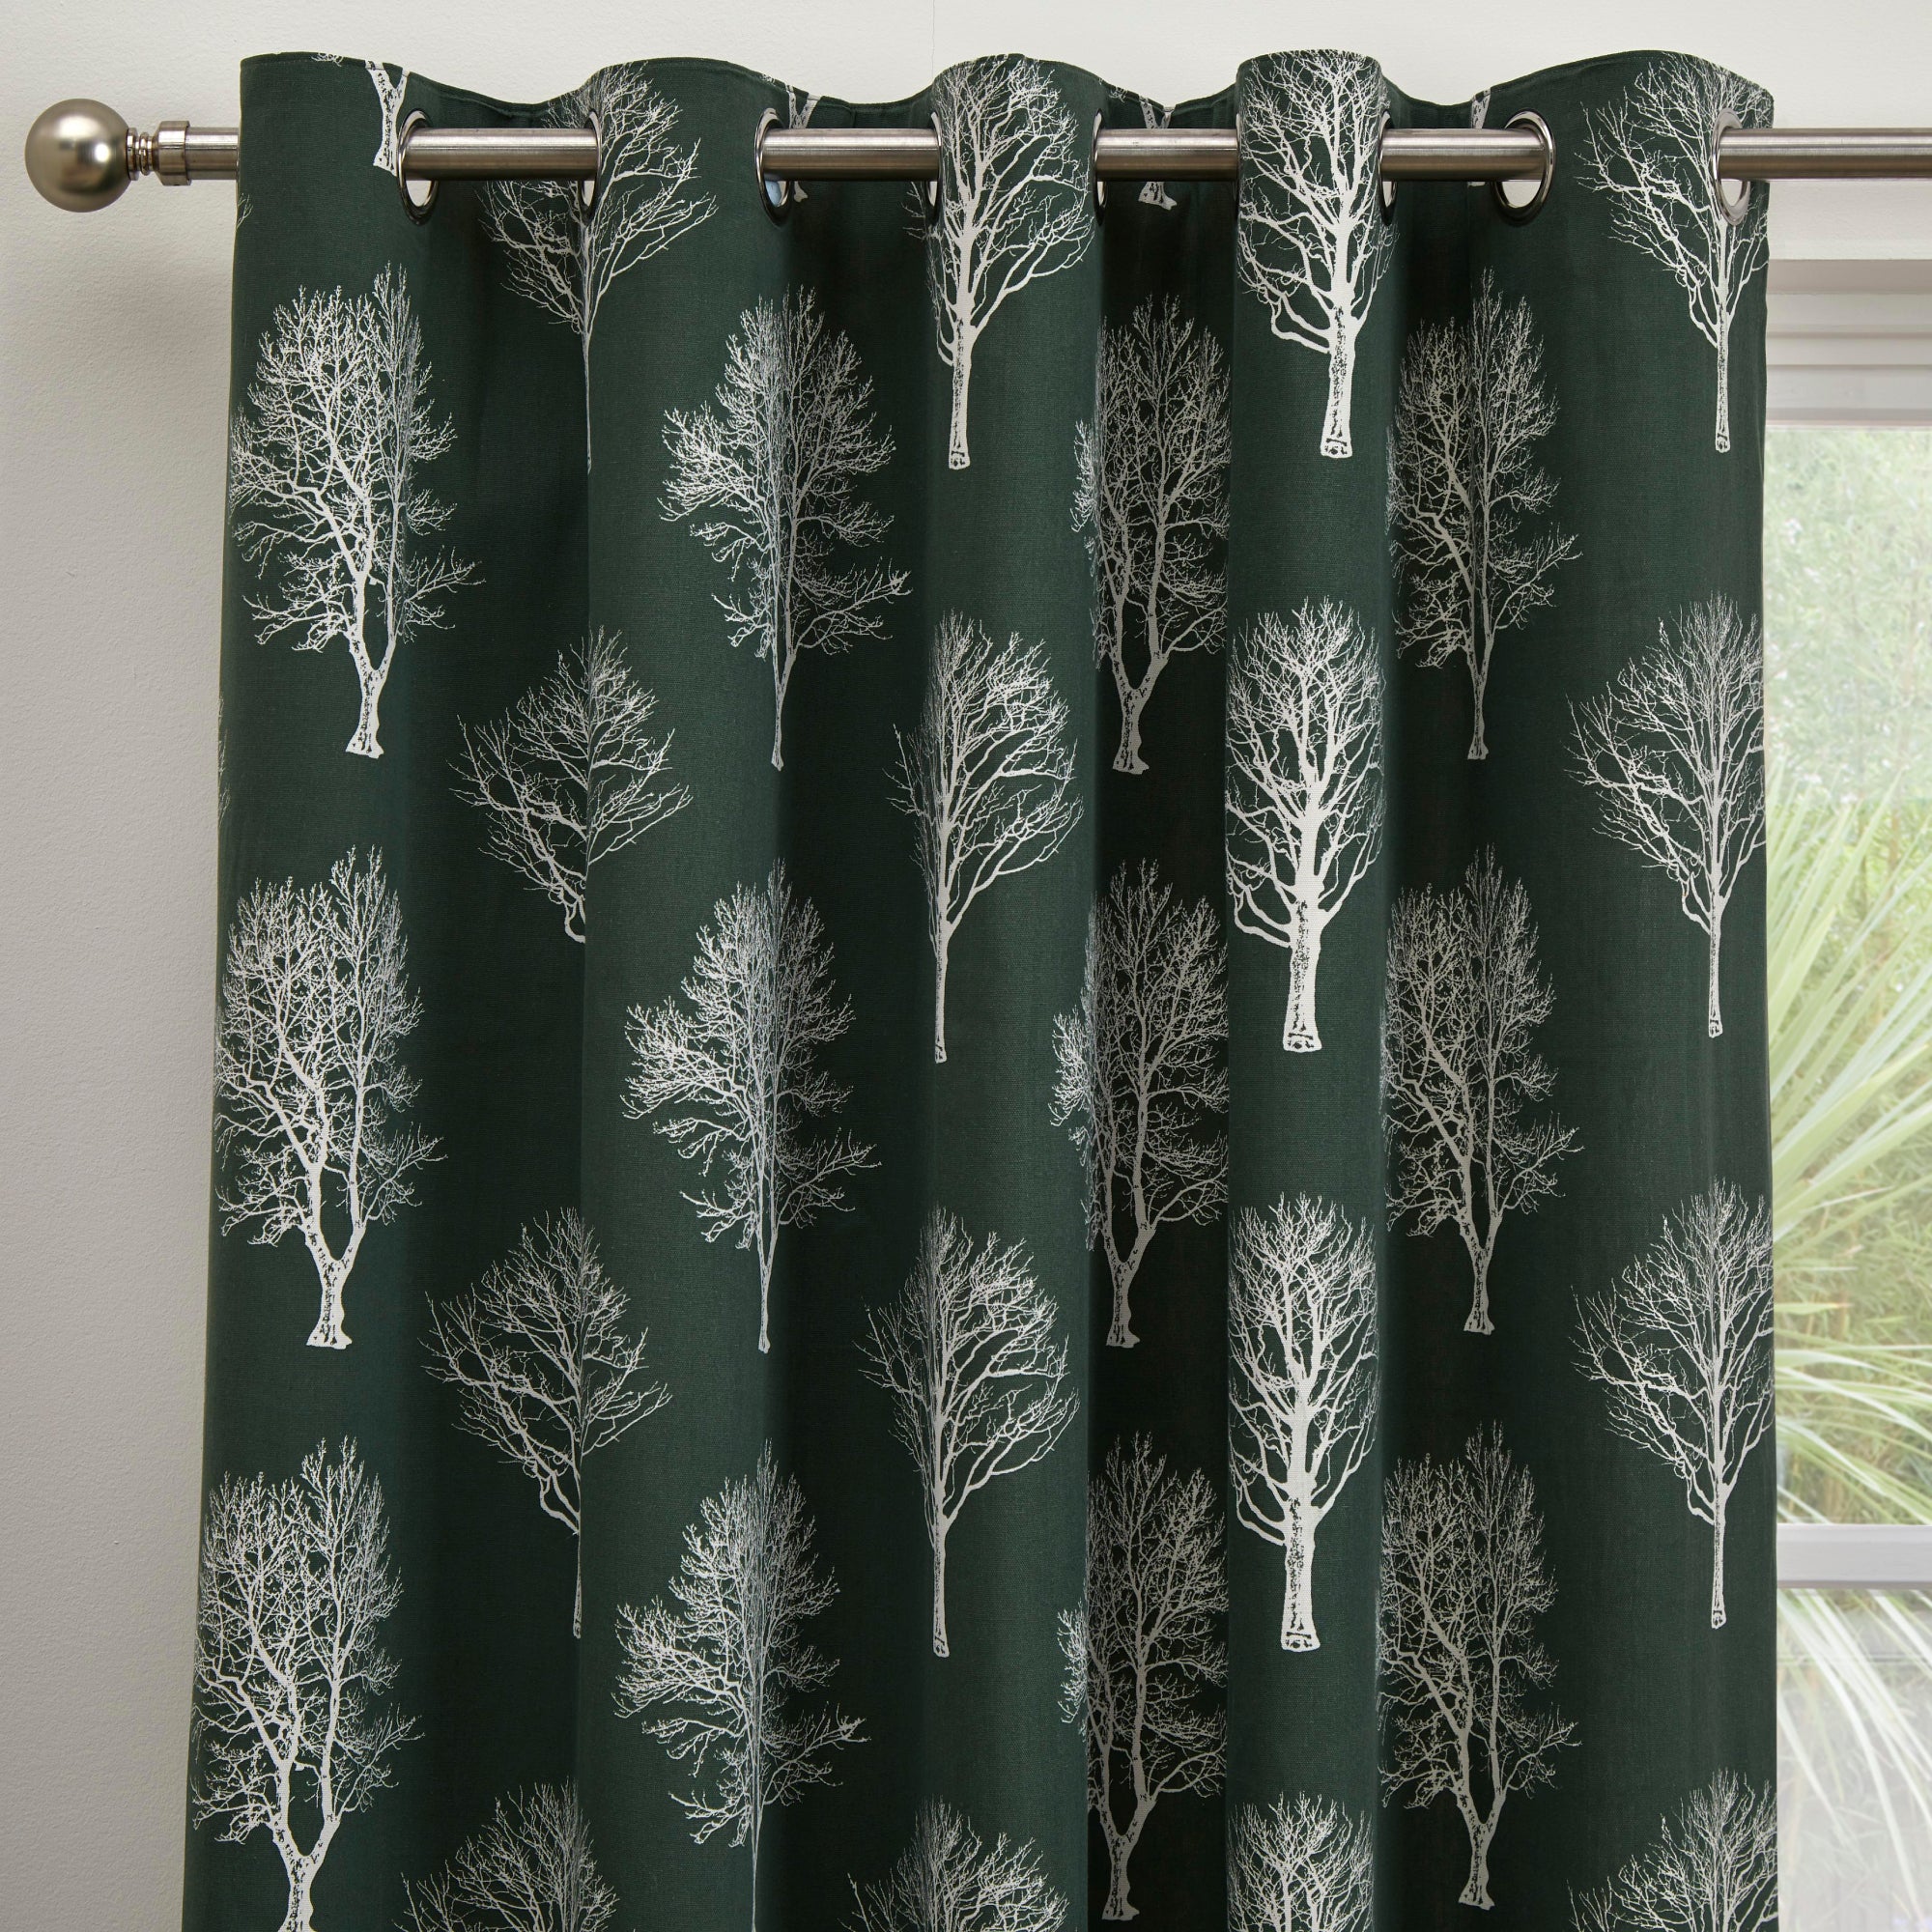 Pair of Eyelet Curtains Woodland Trees by Fusion in Bottle Green